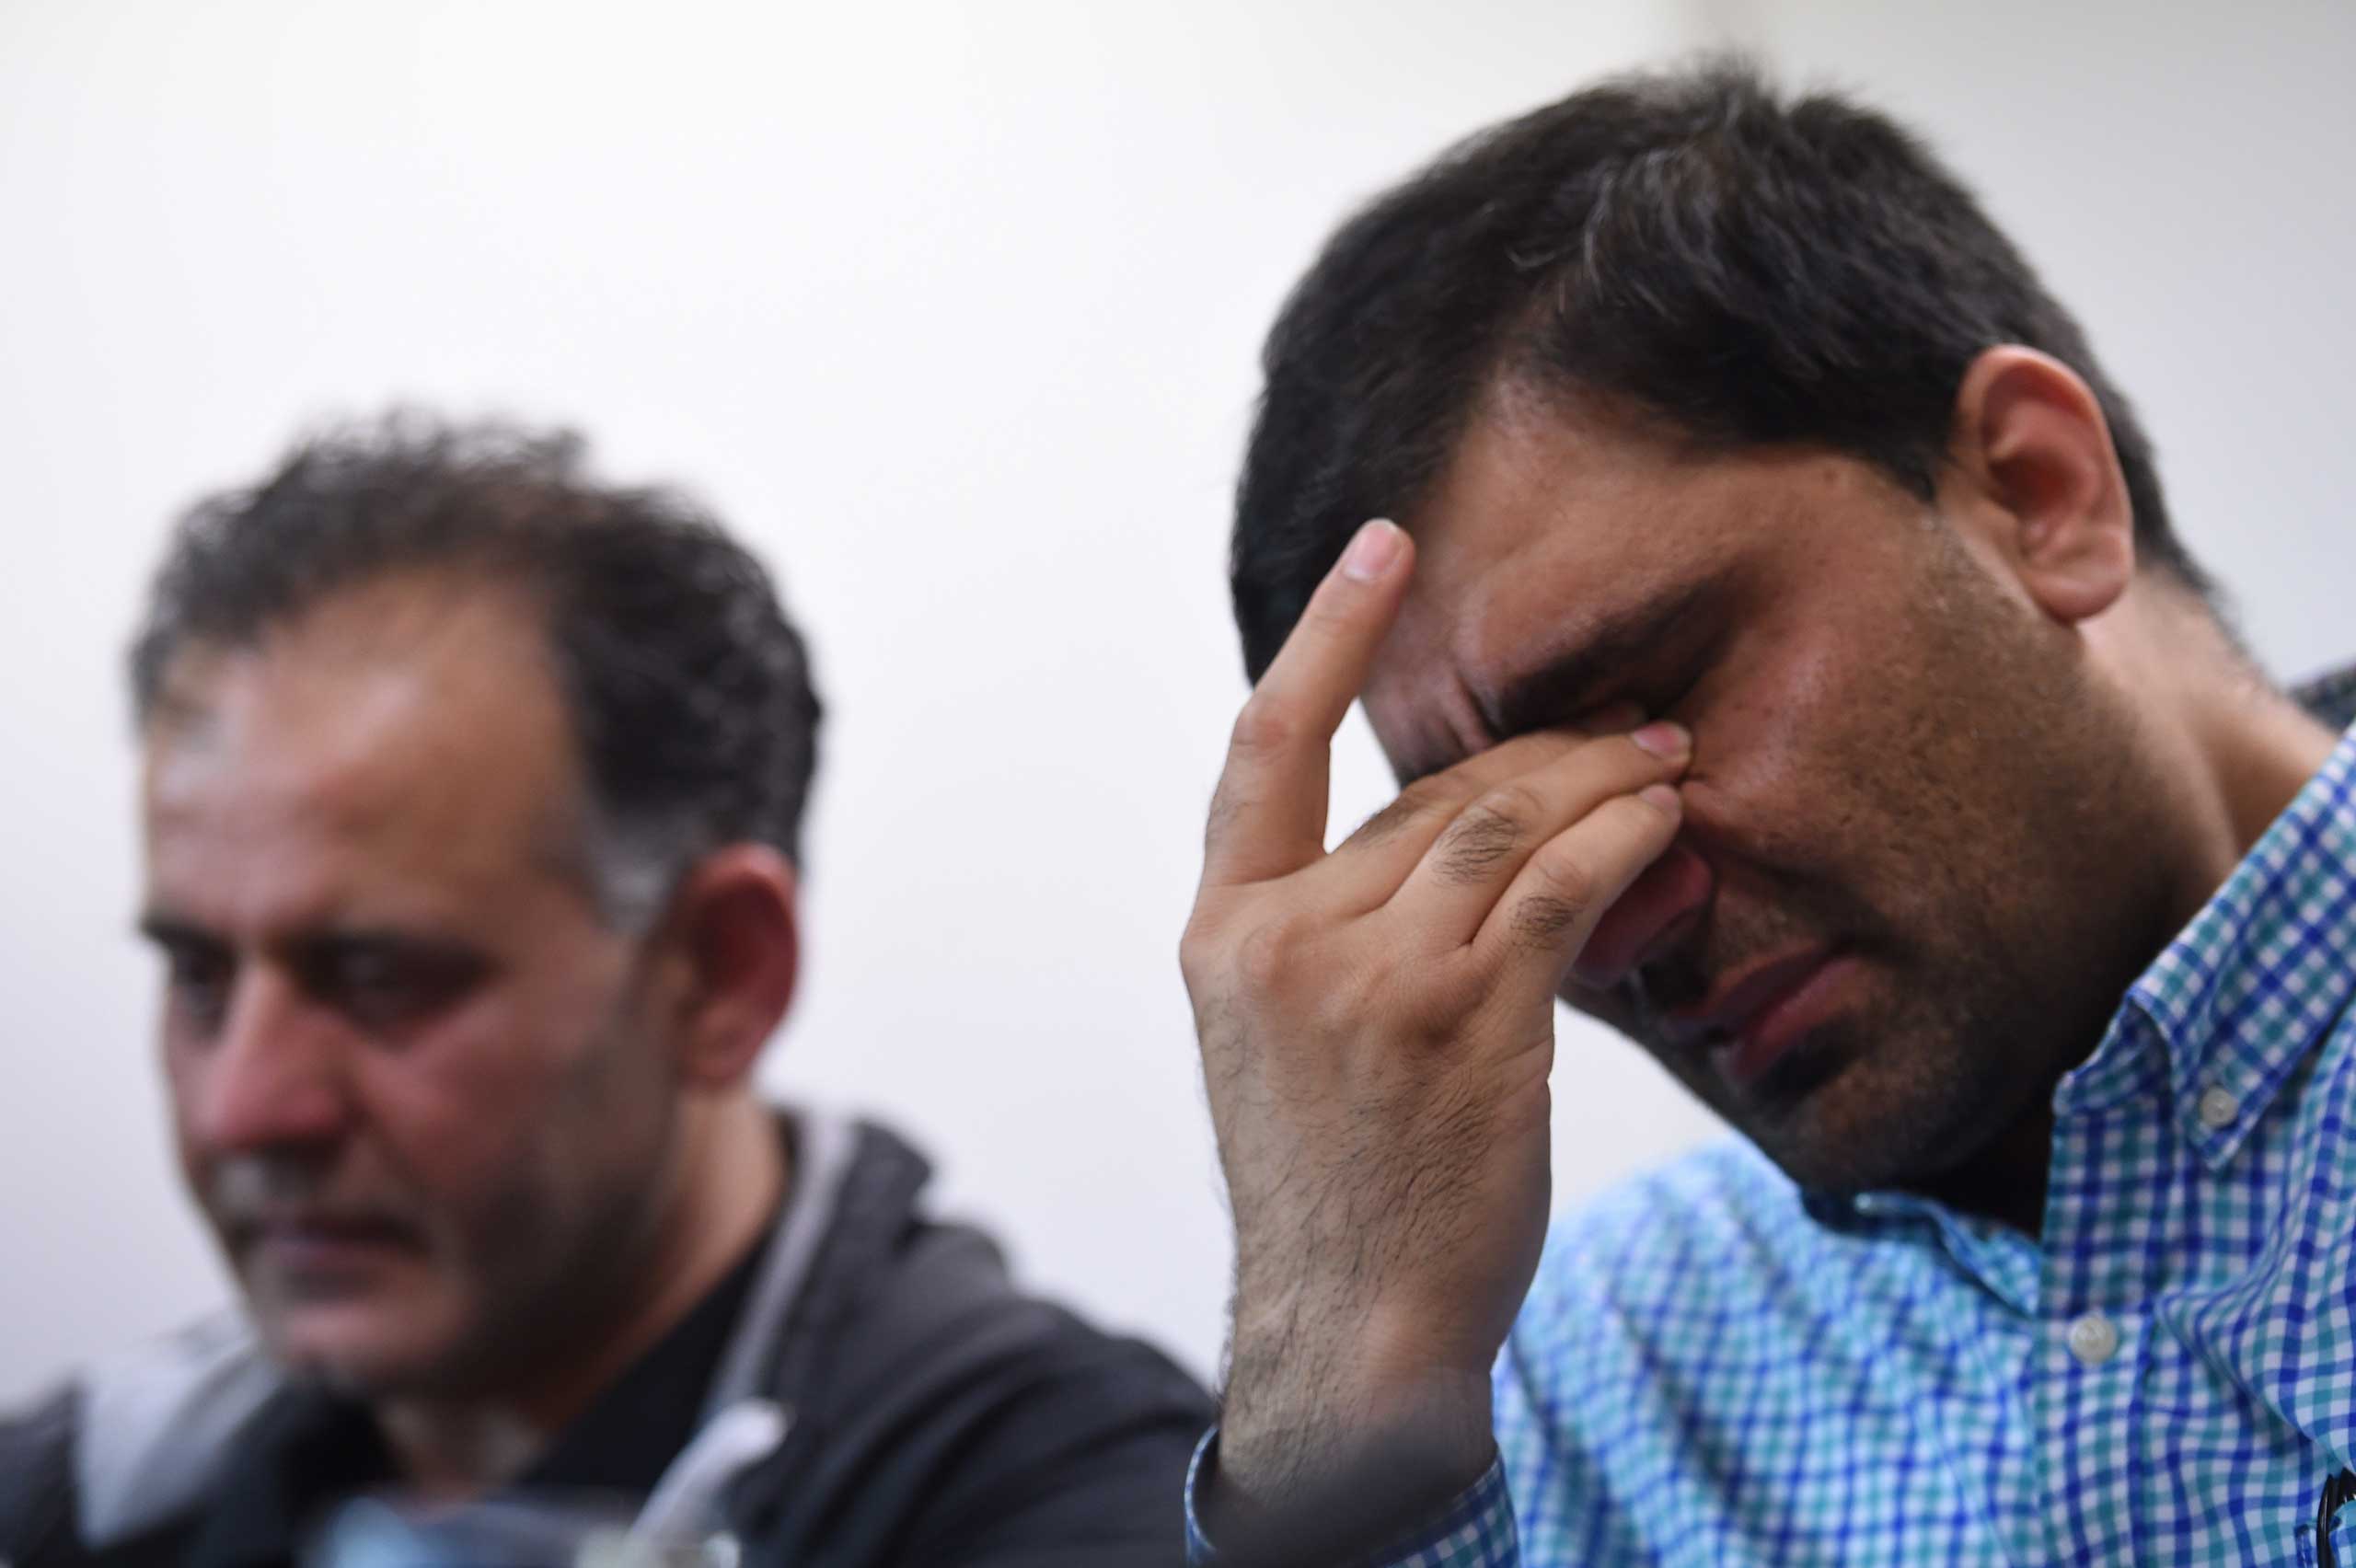 Akhtar Iqbal, husband of Sugra Dawood, left, and Mohammad Shoaib, husband of Khadija Dawood, react during a news conference to appeal for their return, in Bradford, northern England on June 16, 2015. (Paul Ellis—AFP/Getty Images)